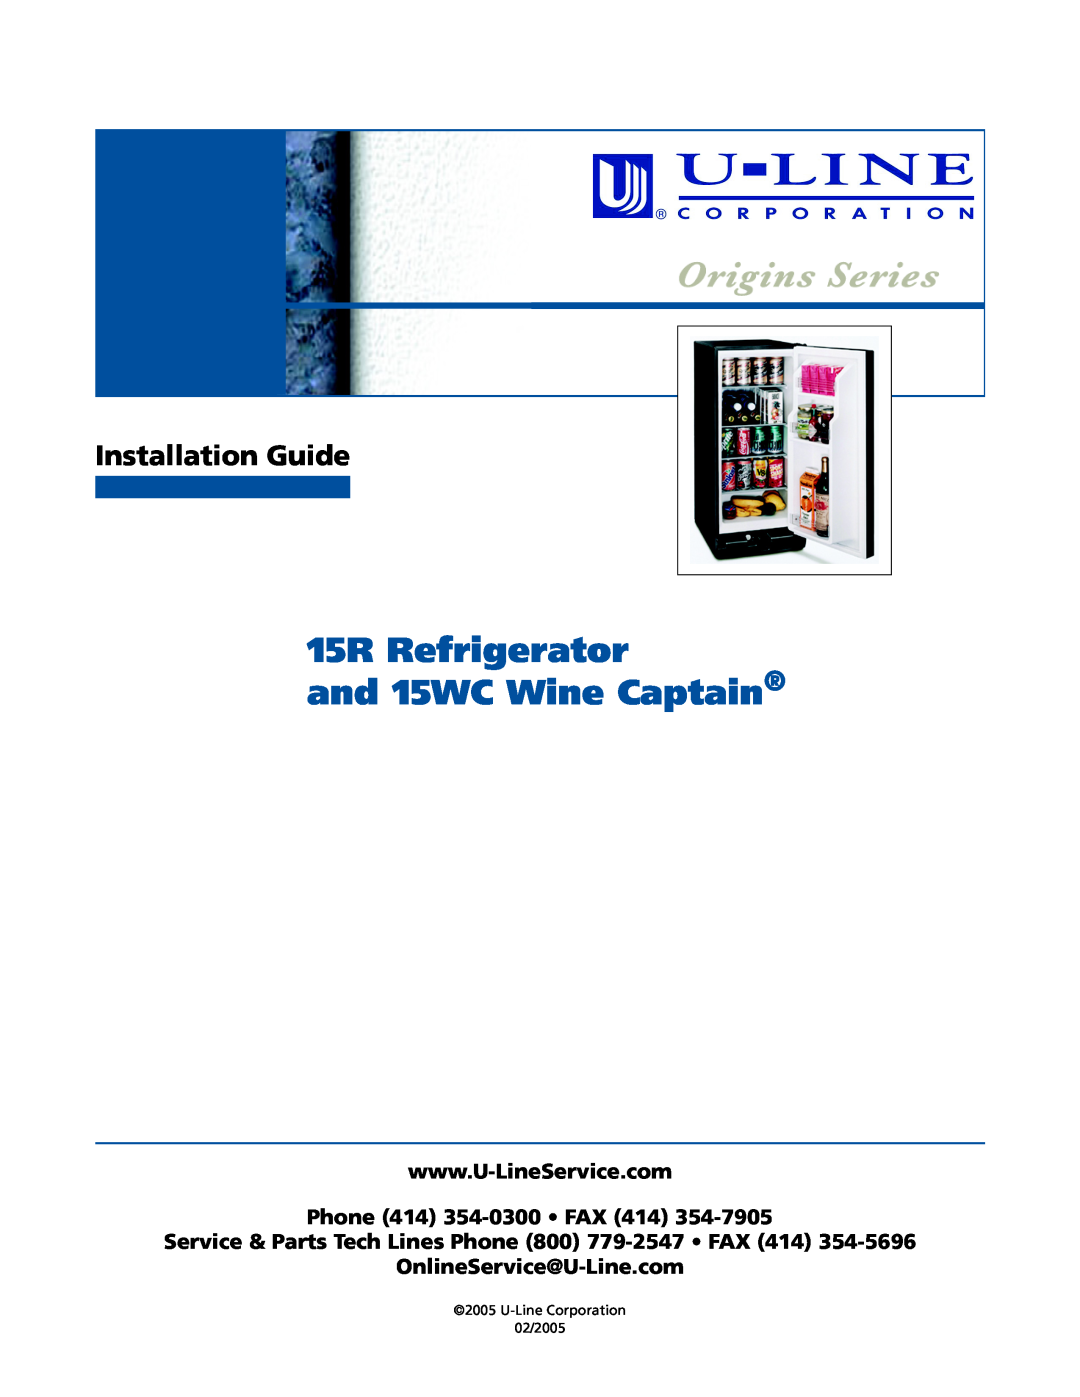 U-Line manual 15R Refrigerator and 15WC Wine Captain, Installation Guide, Phone 414 354-0300 FAX 414 